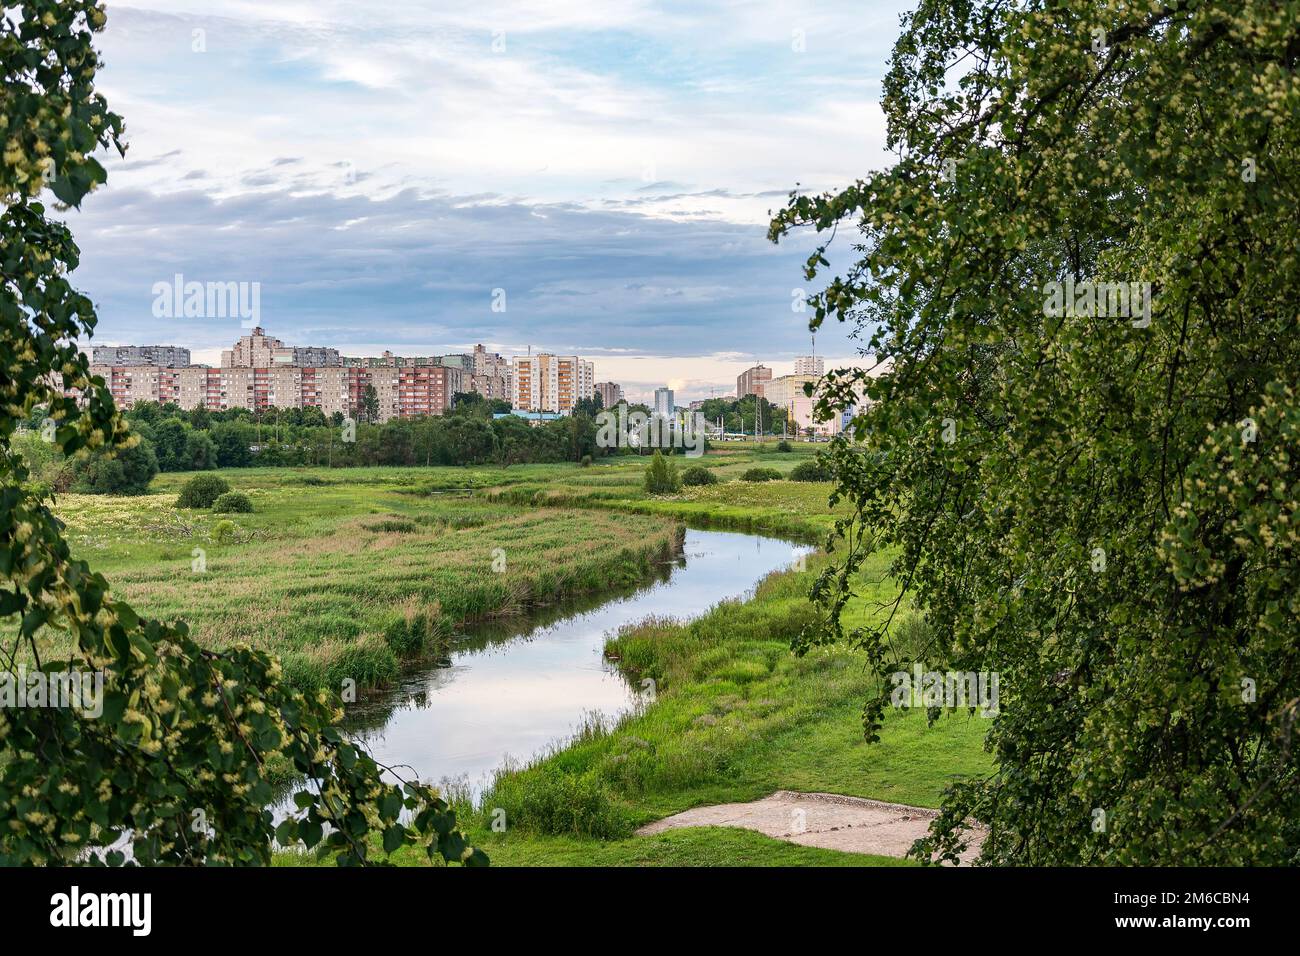 A green field with a small river can be seen the outskirts of the city Stock Photo